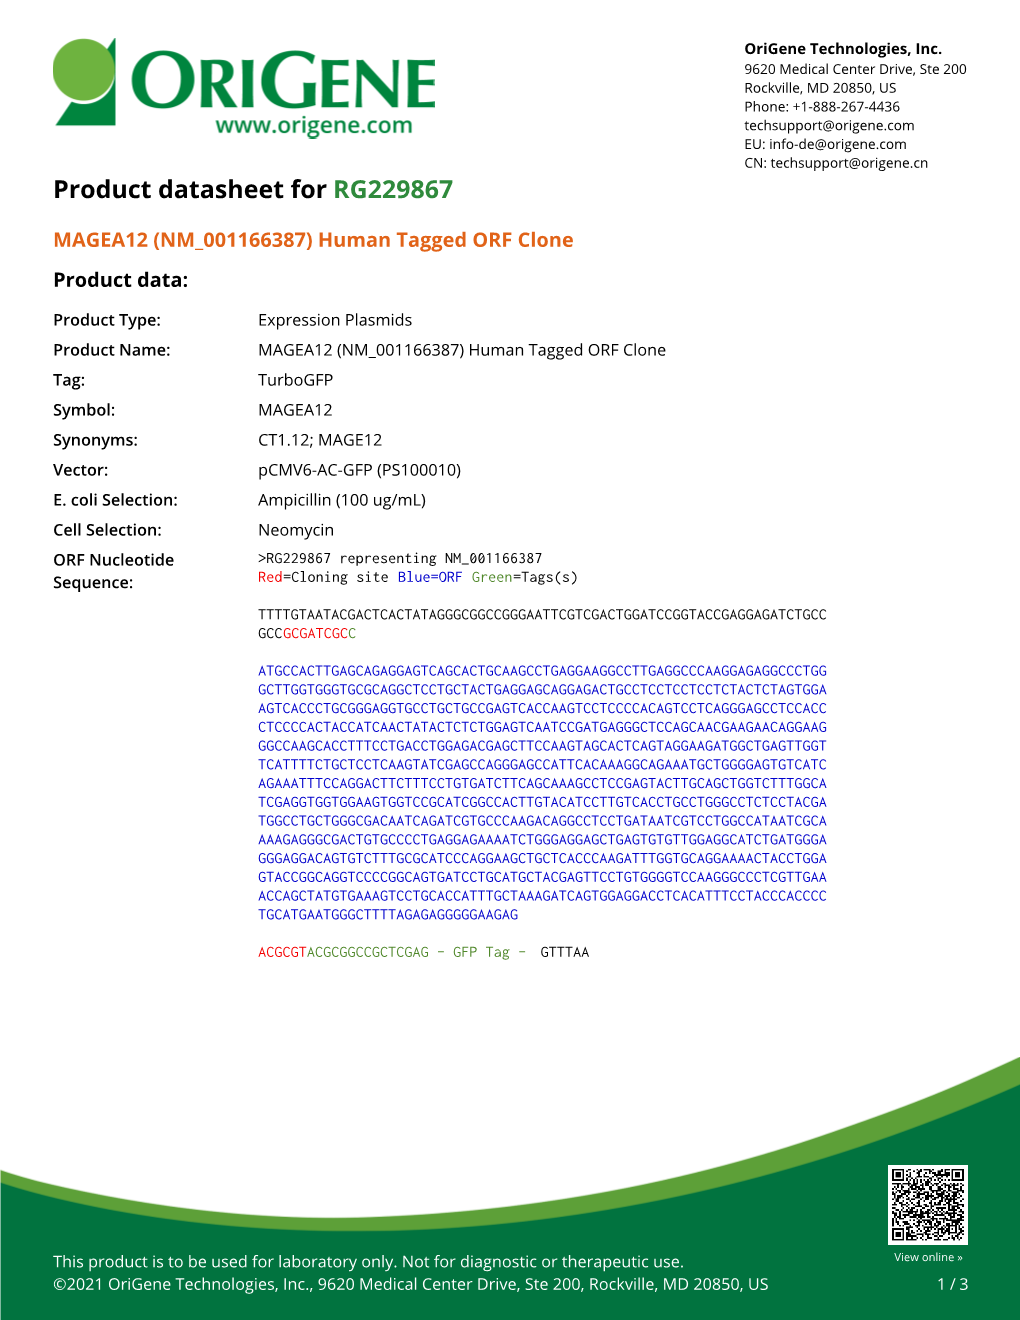 MAGEA12 (NM 001166387) Human Tagged ORF Clone Product Data